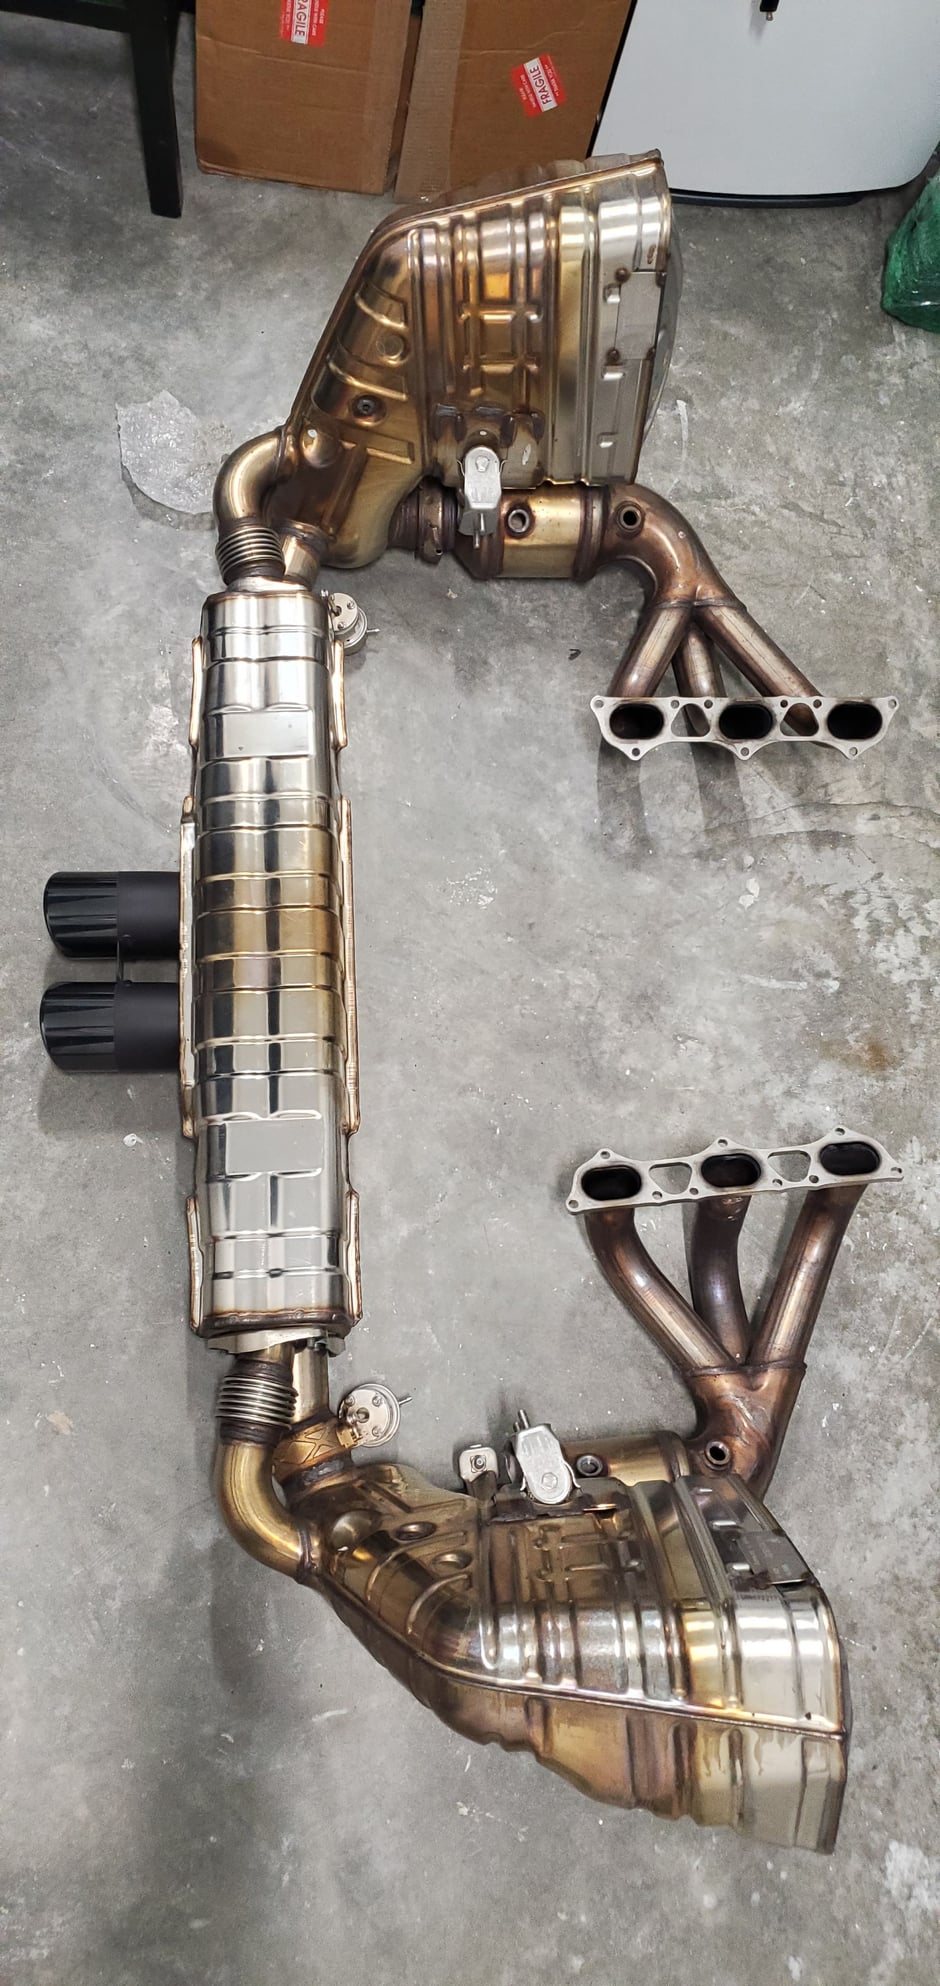 Engine - Exhaust - Almost new 991 GT3 headers and full exhaust system - Used - 2018 to 2019 Porsche GT3 - Washington, DC 20002, United States